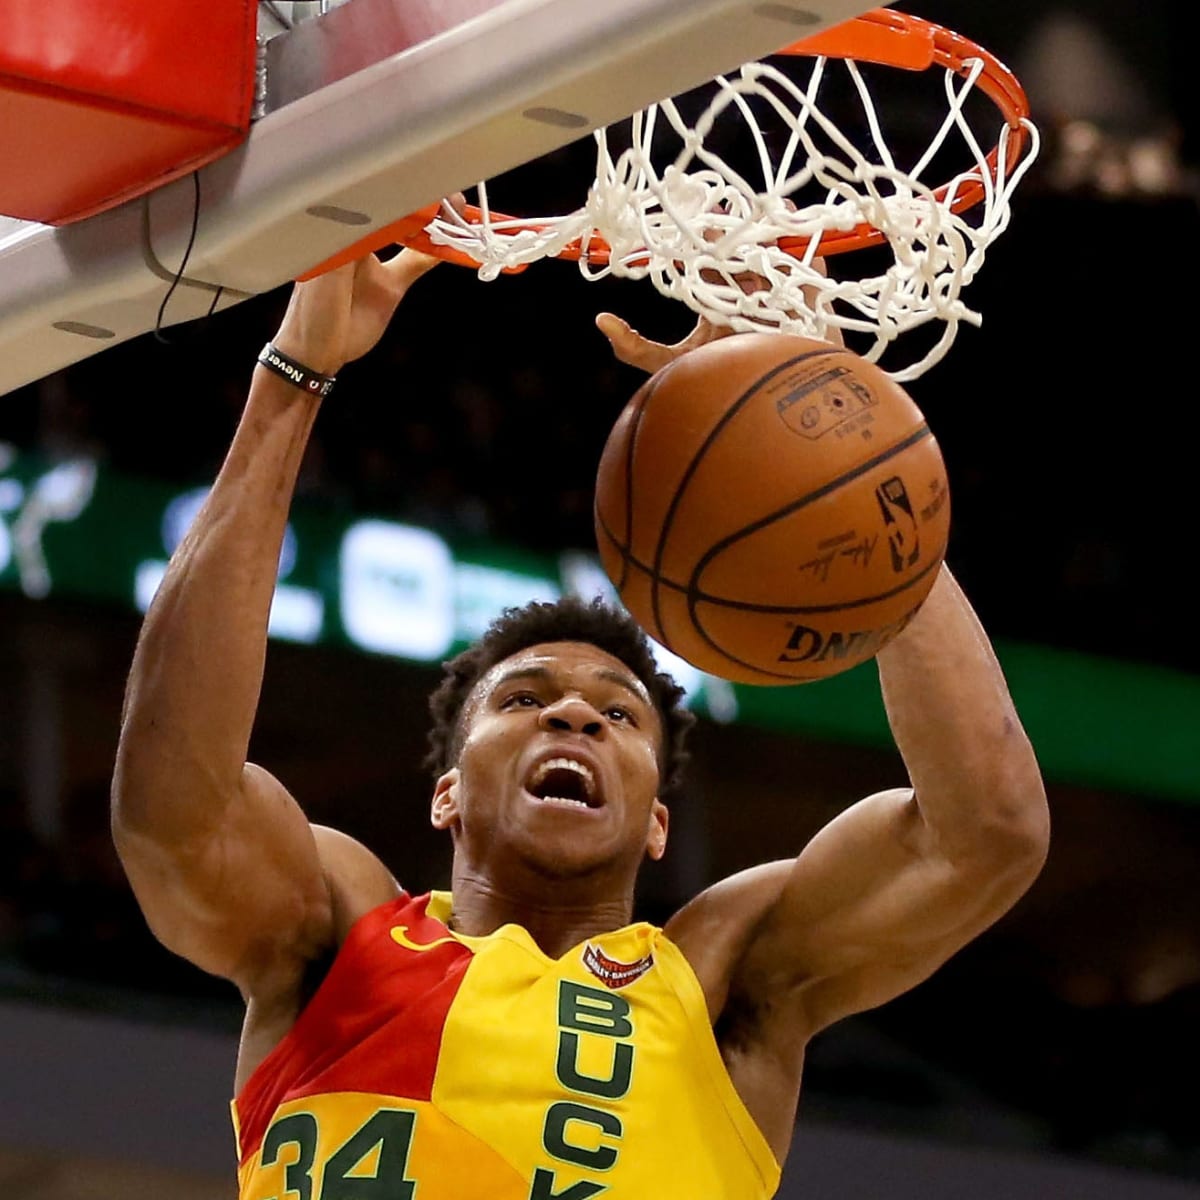 Arms and legs and hands and desire': Giannis Antetokounmpo's early